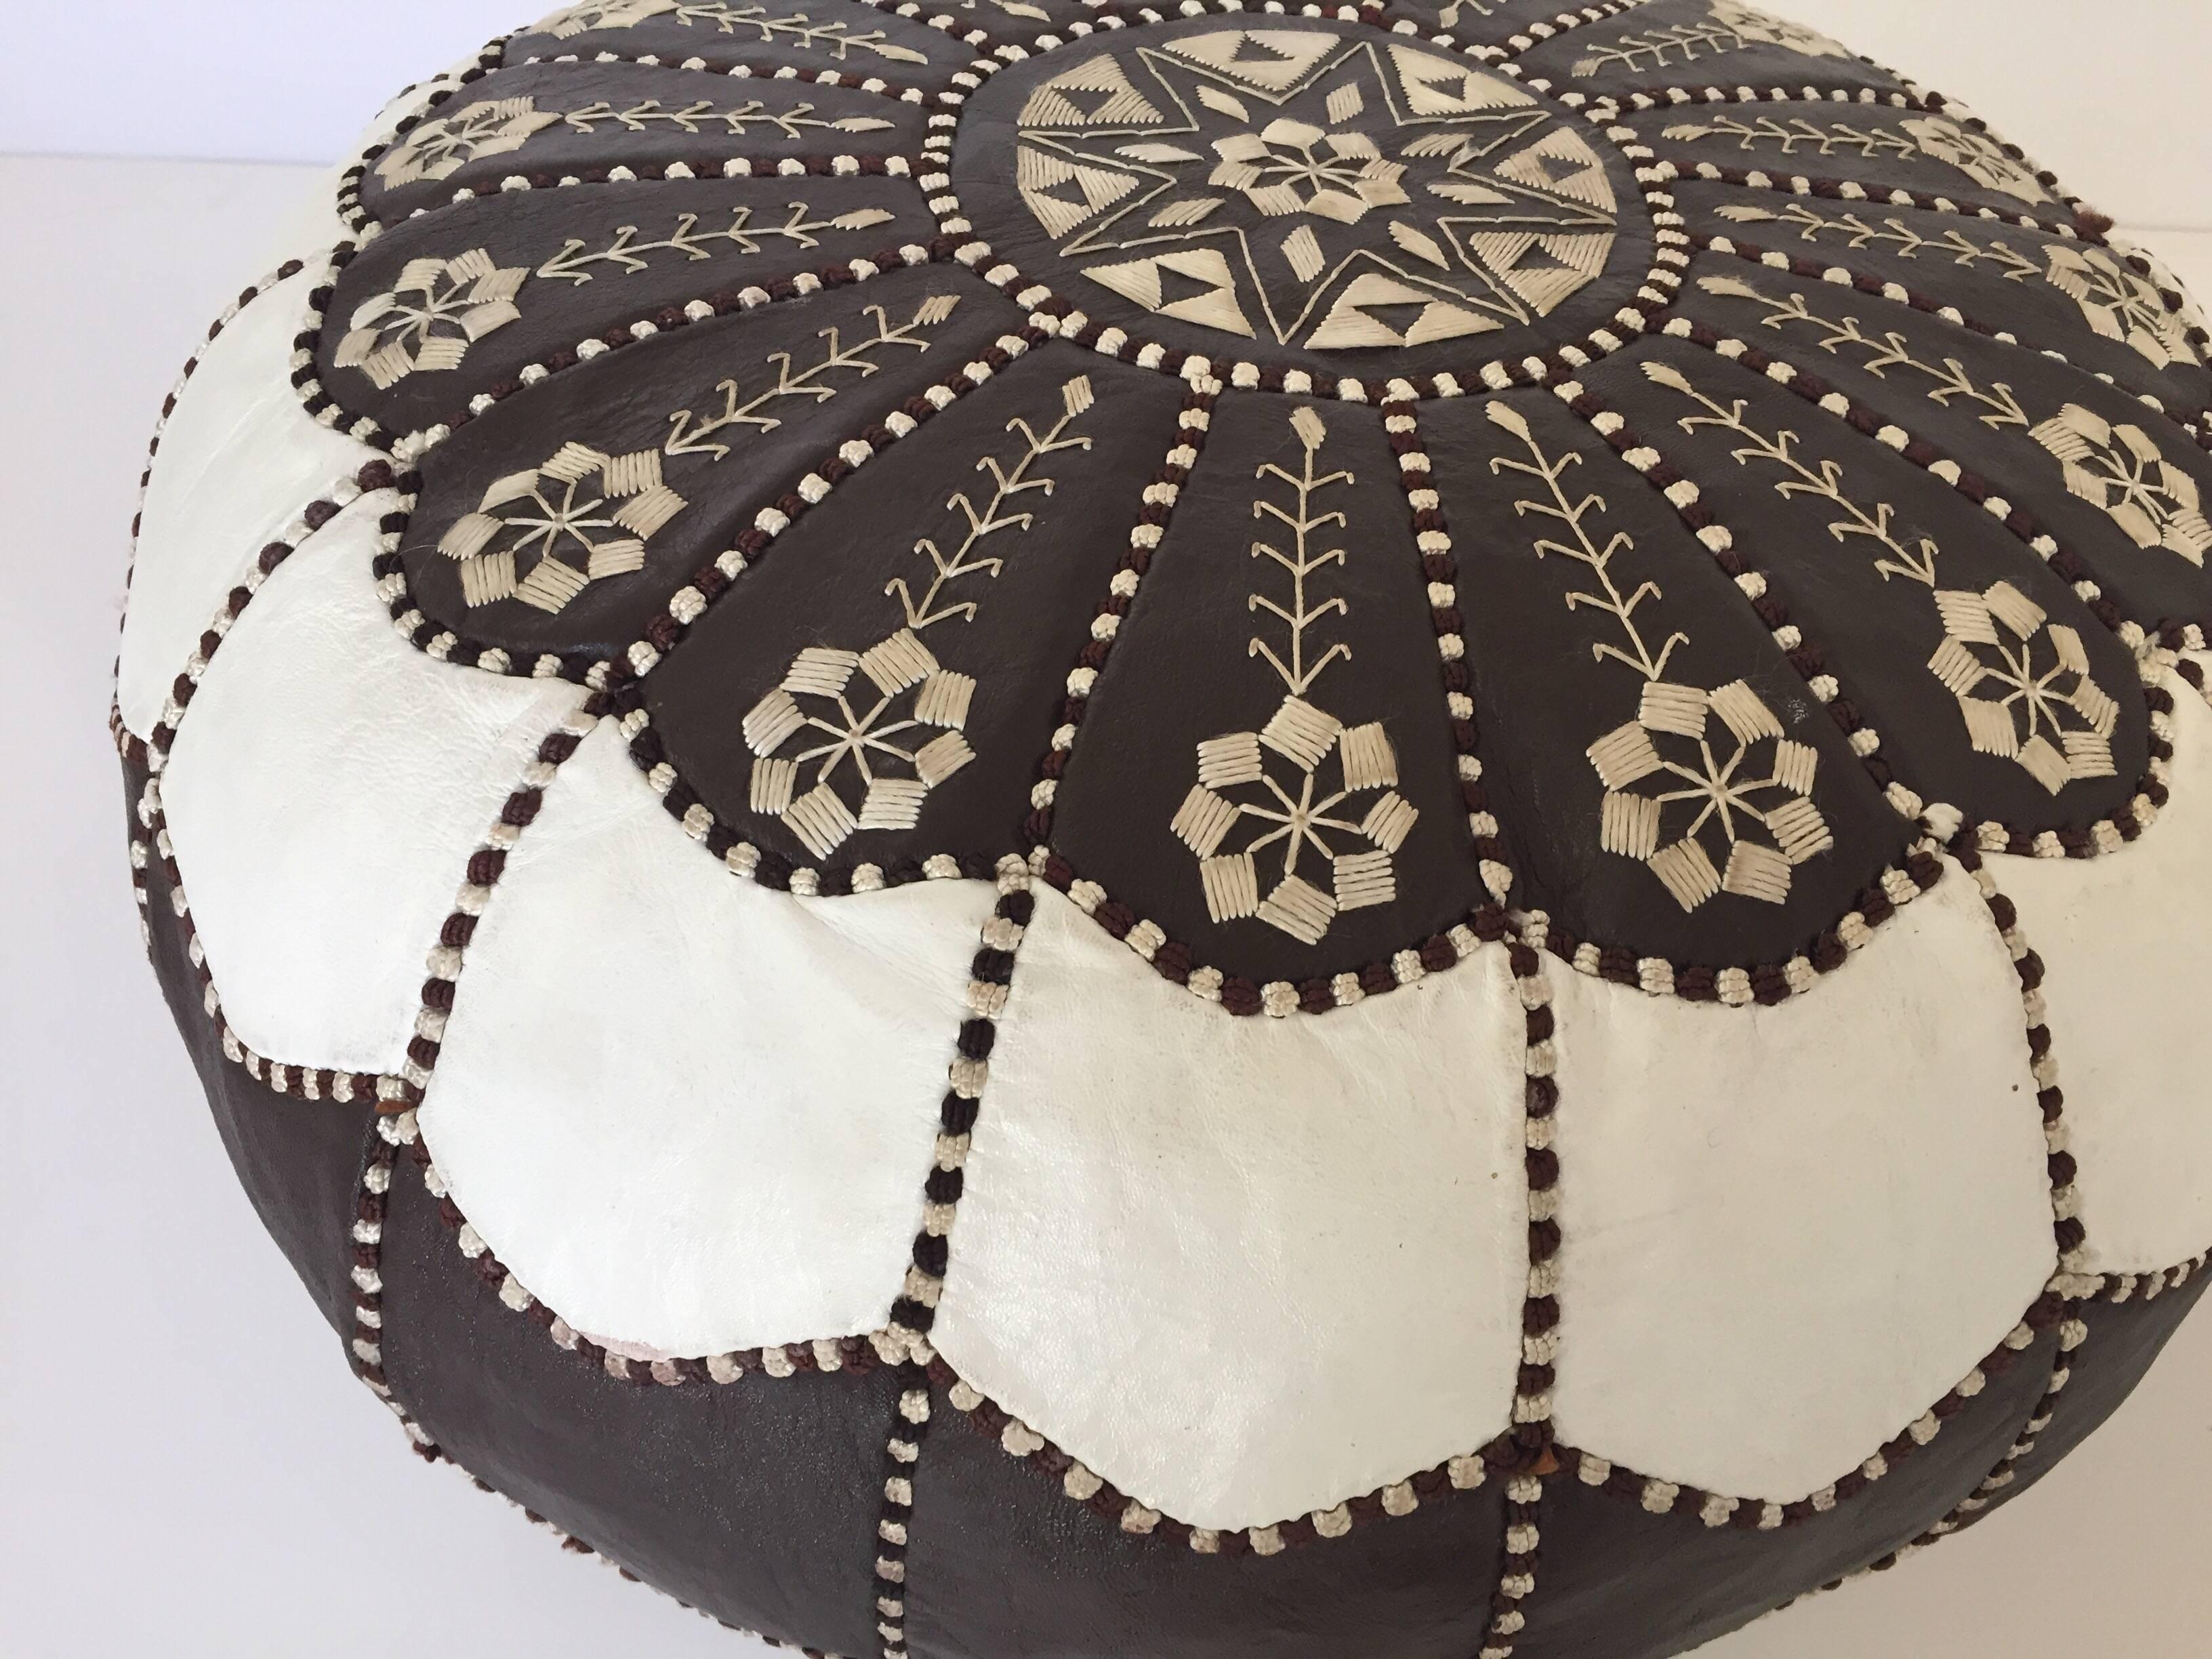 Hand-Crafted Moroccan Vintage Round Leather Pouf Brown and White Embroidered